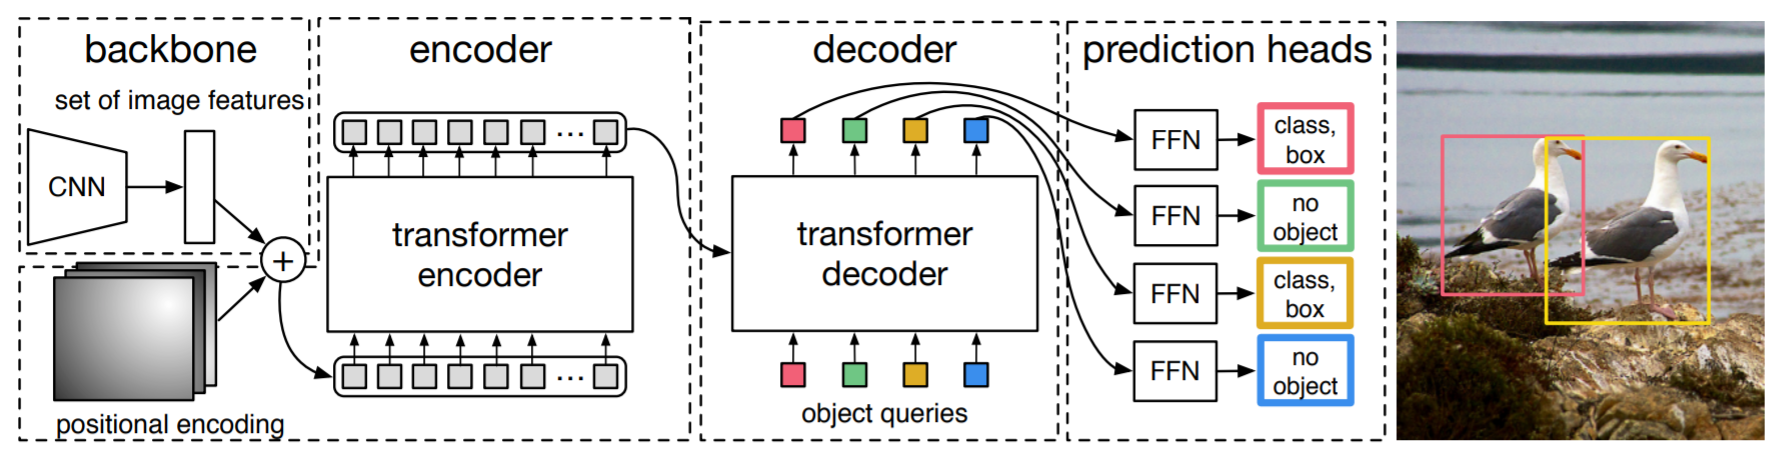 DETR: End-to-End Object Detection with Transformers(ECCV 2020)